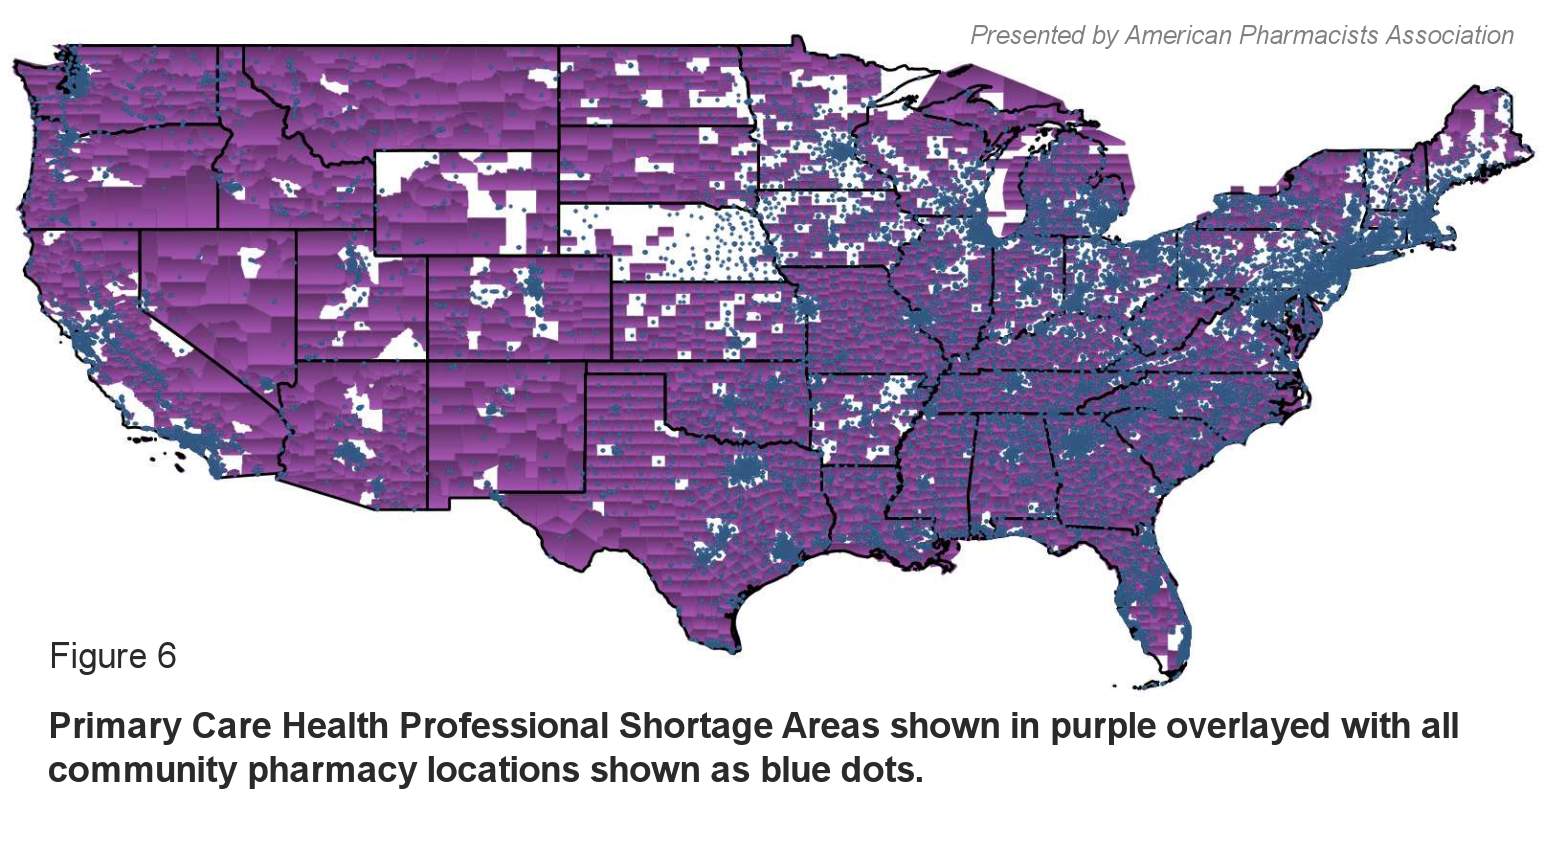 Figure 6: Primary Care Health Professional Shortage Areas shown in purple overlayed with all community pharmacy locations shown as blue dots.